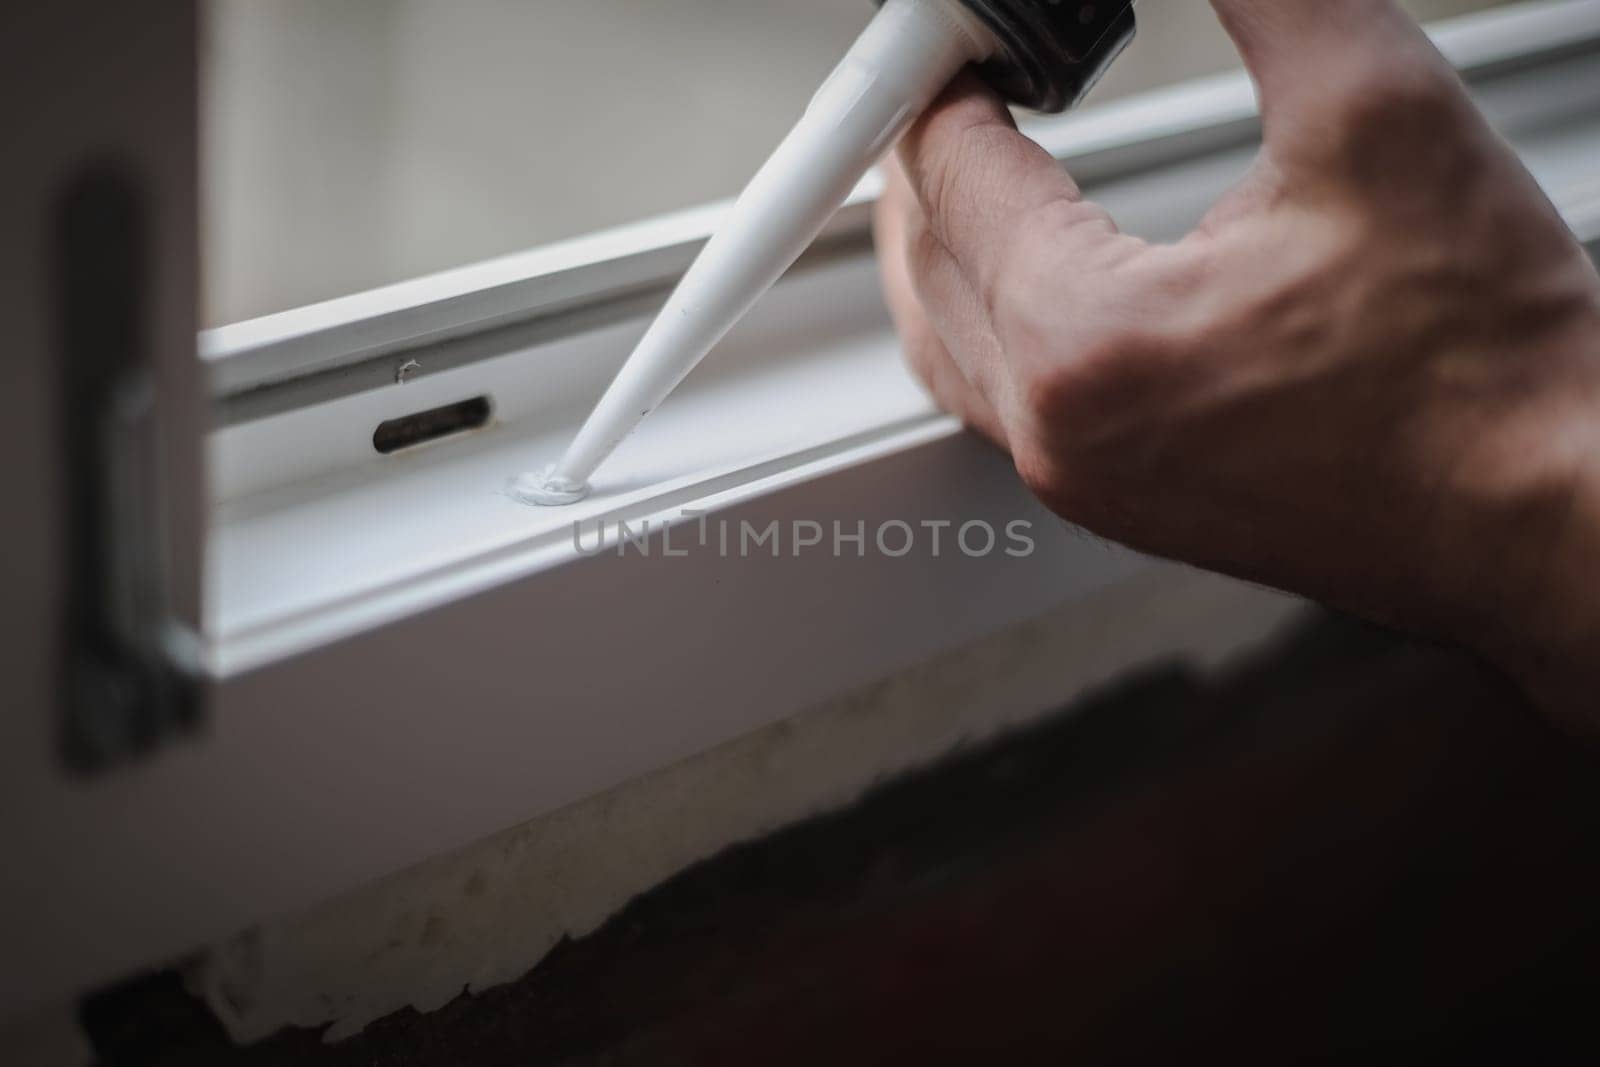 The hands of a young caucasian man squeezes white silicone into a small hole in the window frame, close-up side view with selective focus.